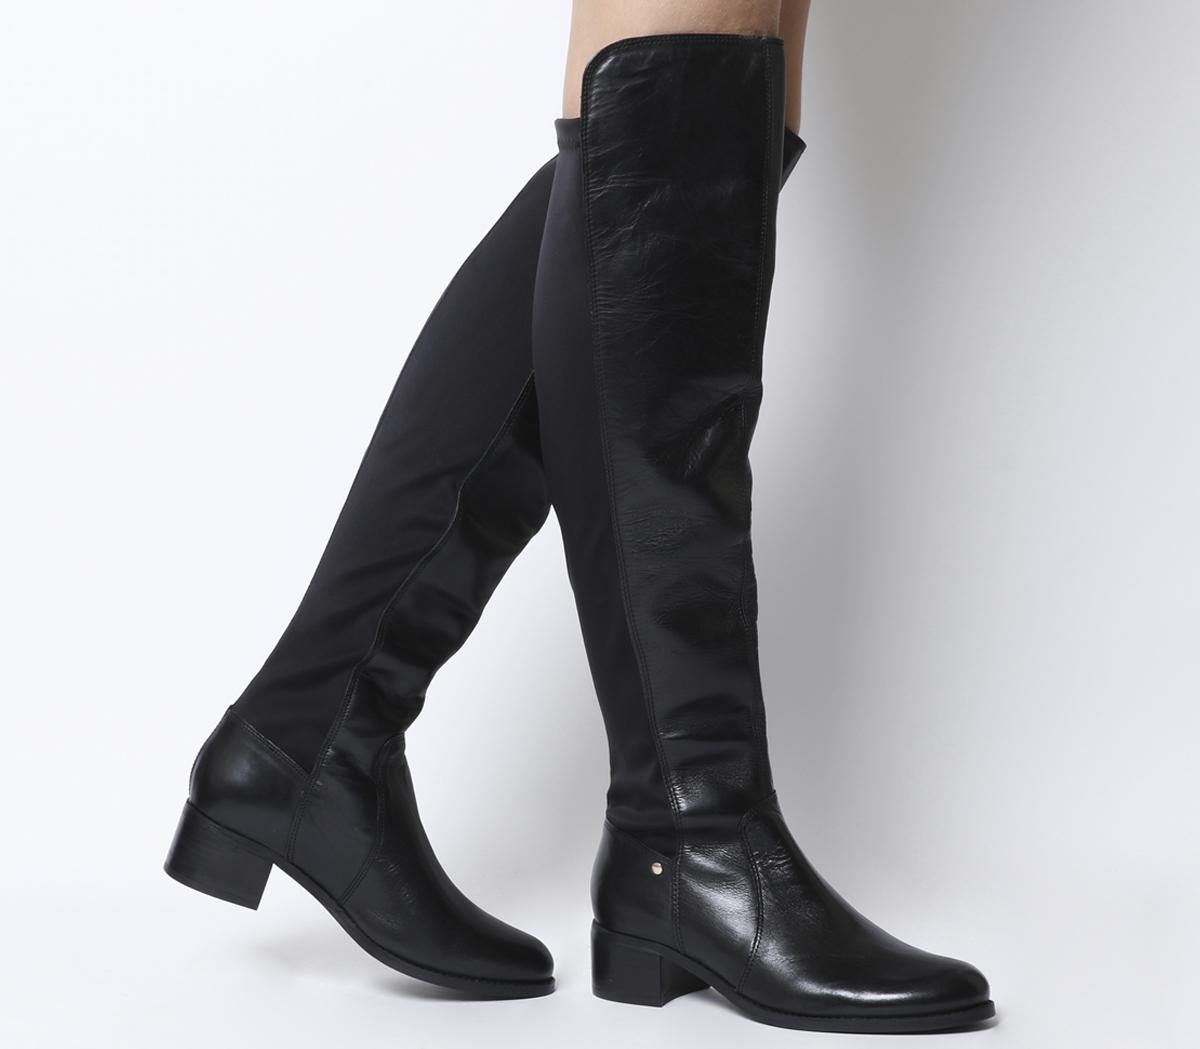 Knee Boots Black Leather - Knee High Boots